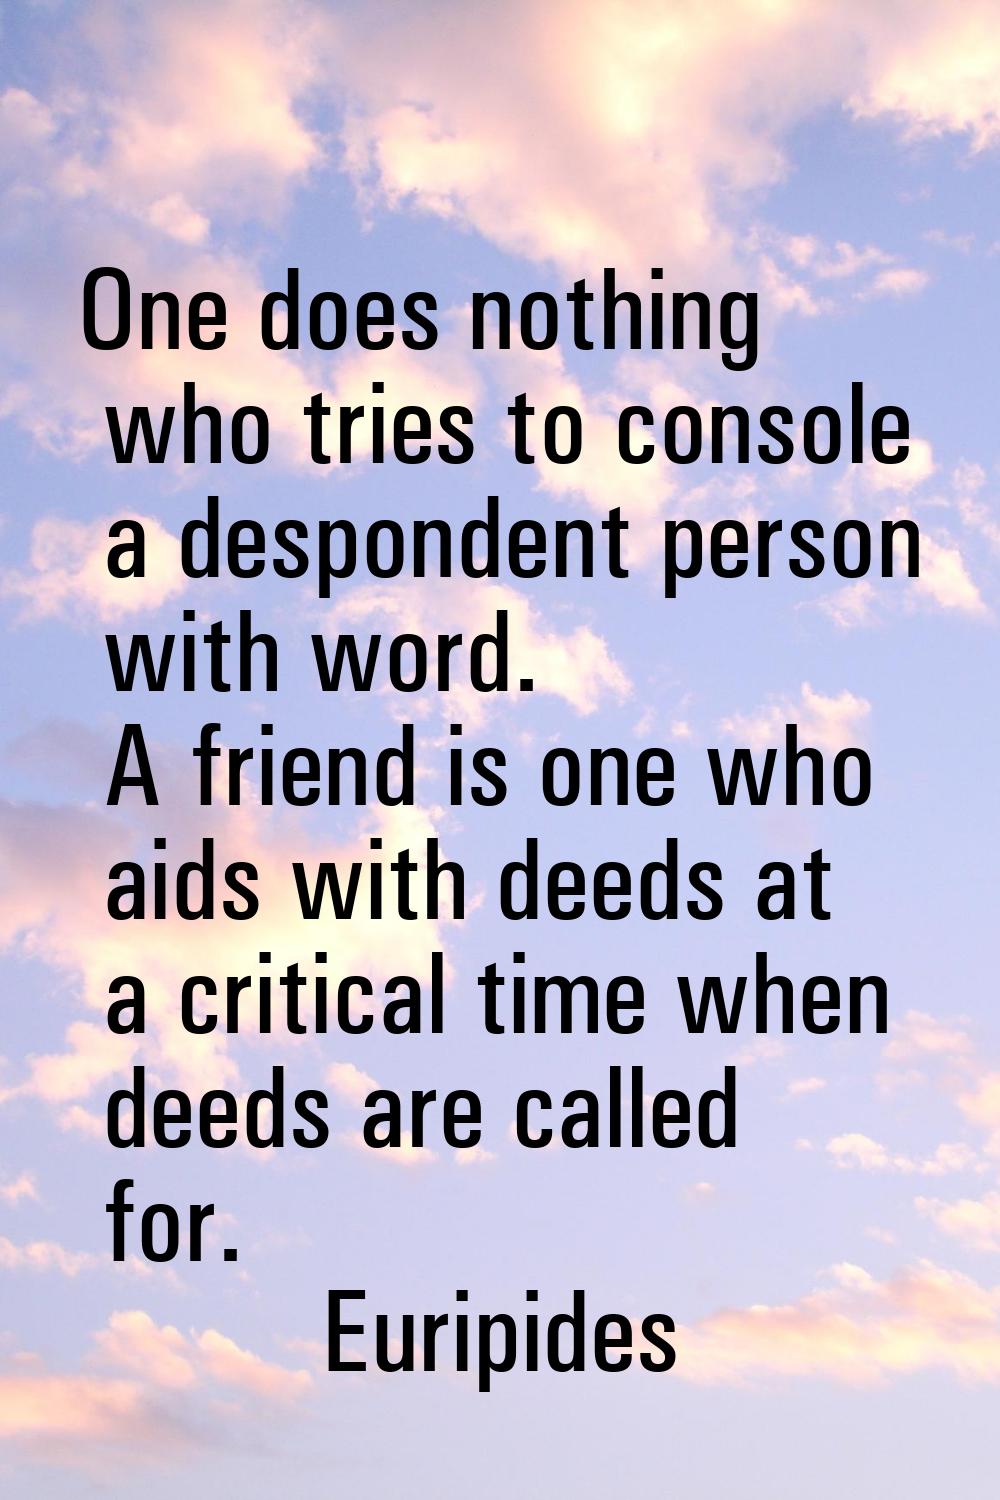 One does nothing who tries to console a despondent person with word. A friend is one who aids with 